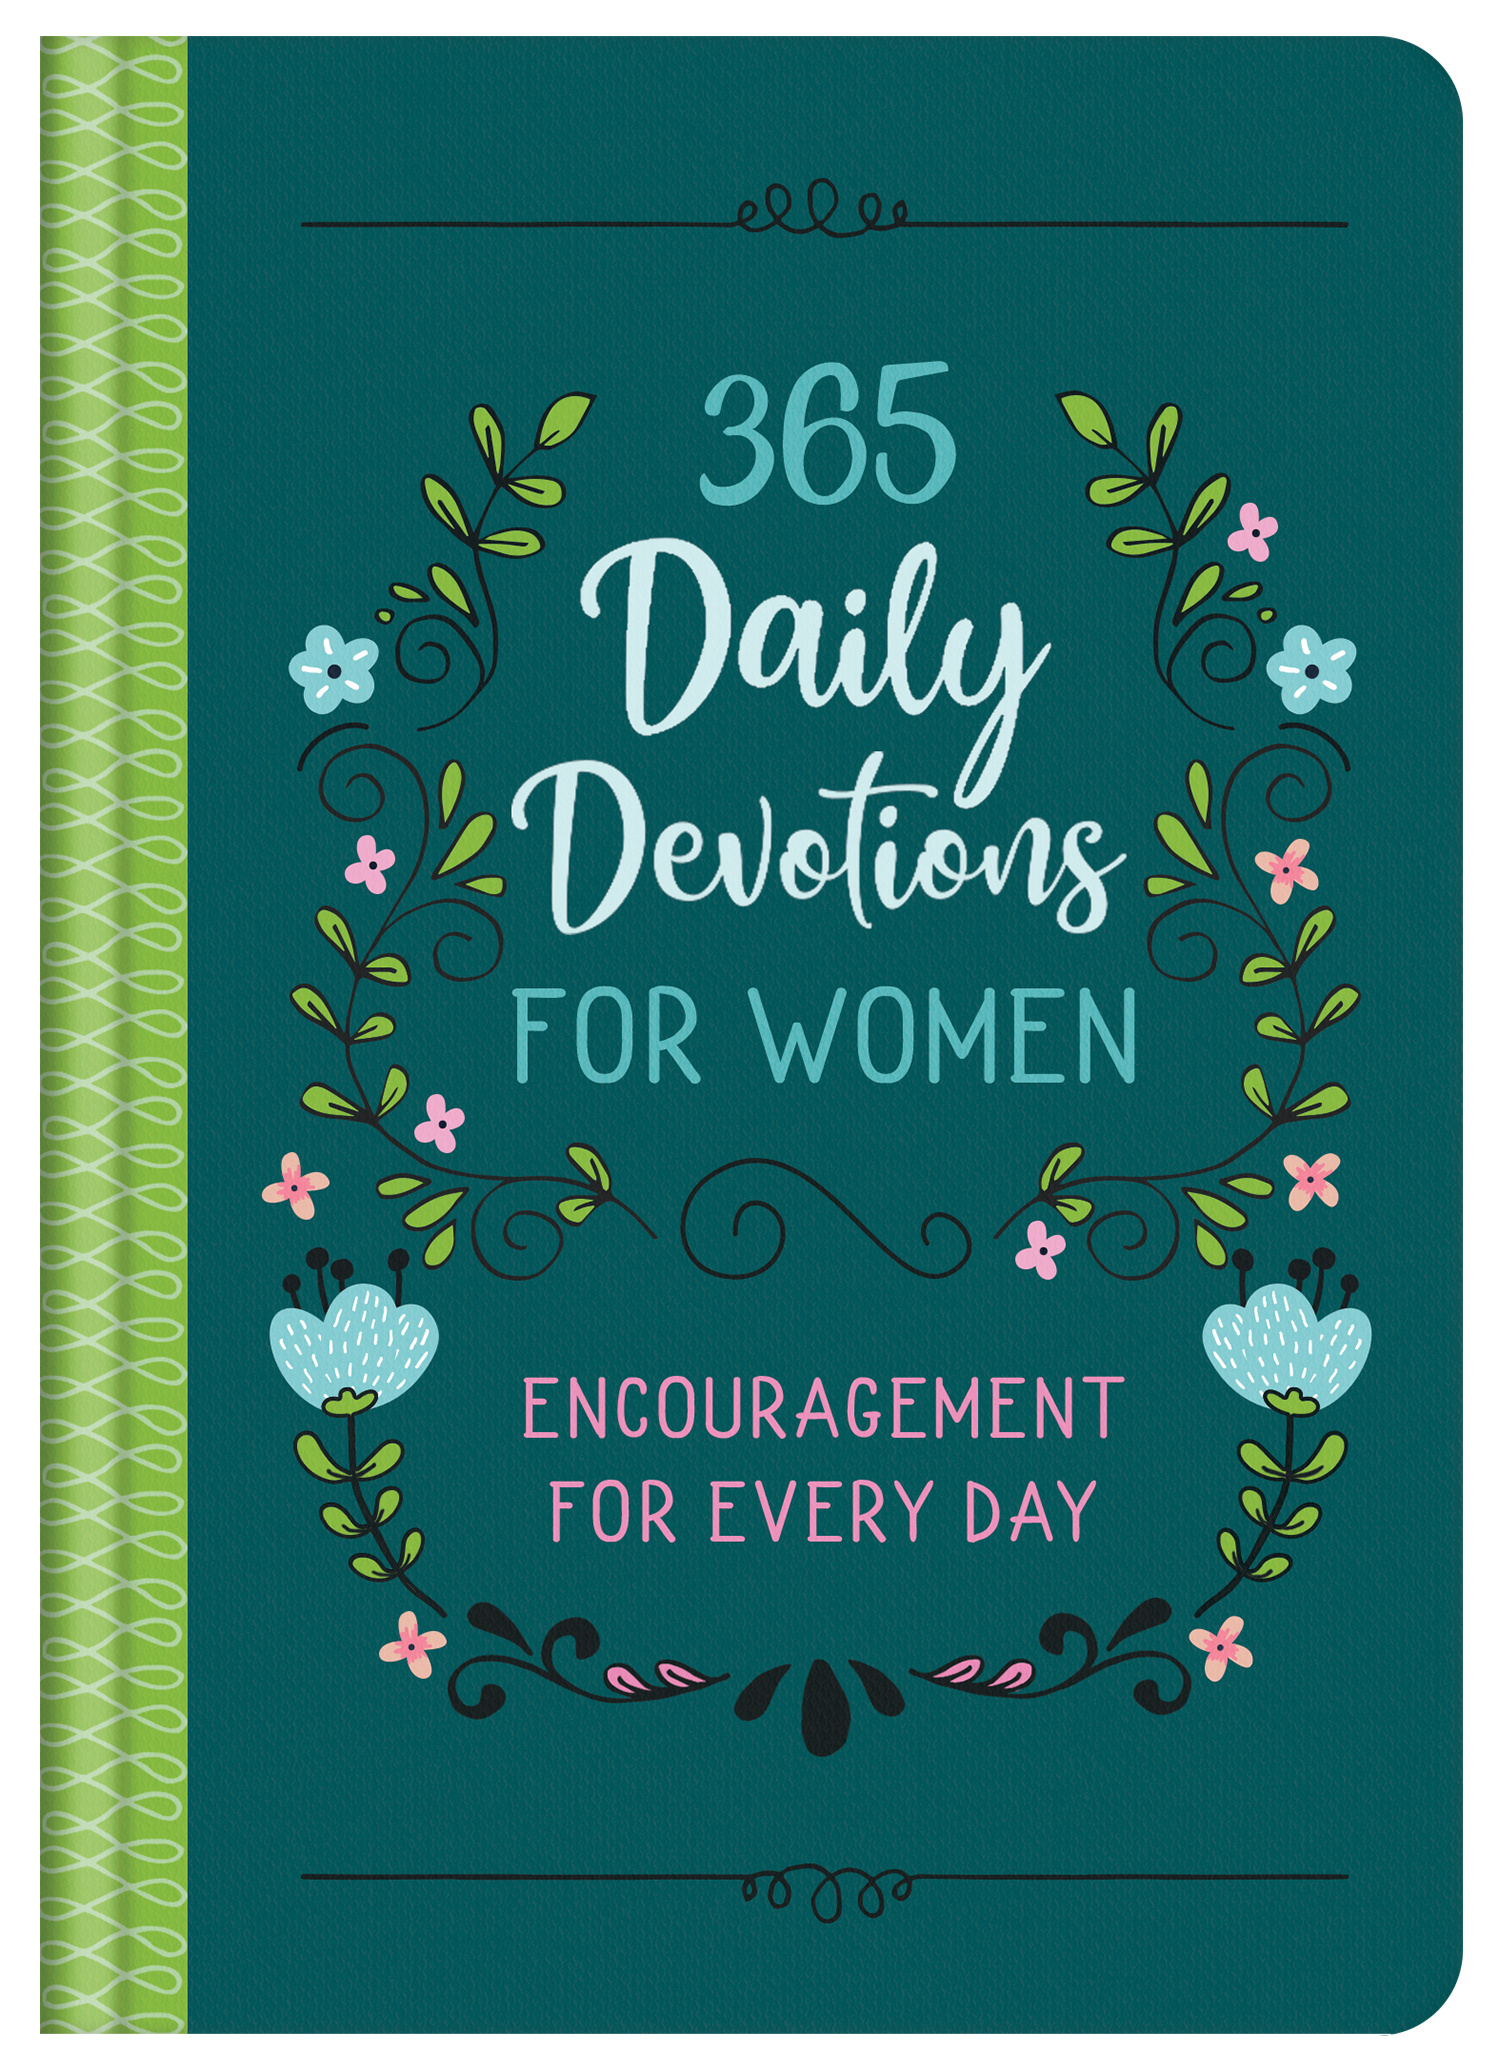 daily-devotional-books-for-women-women-s-daily-devotional-with-free